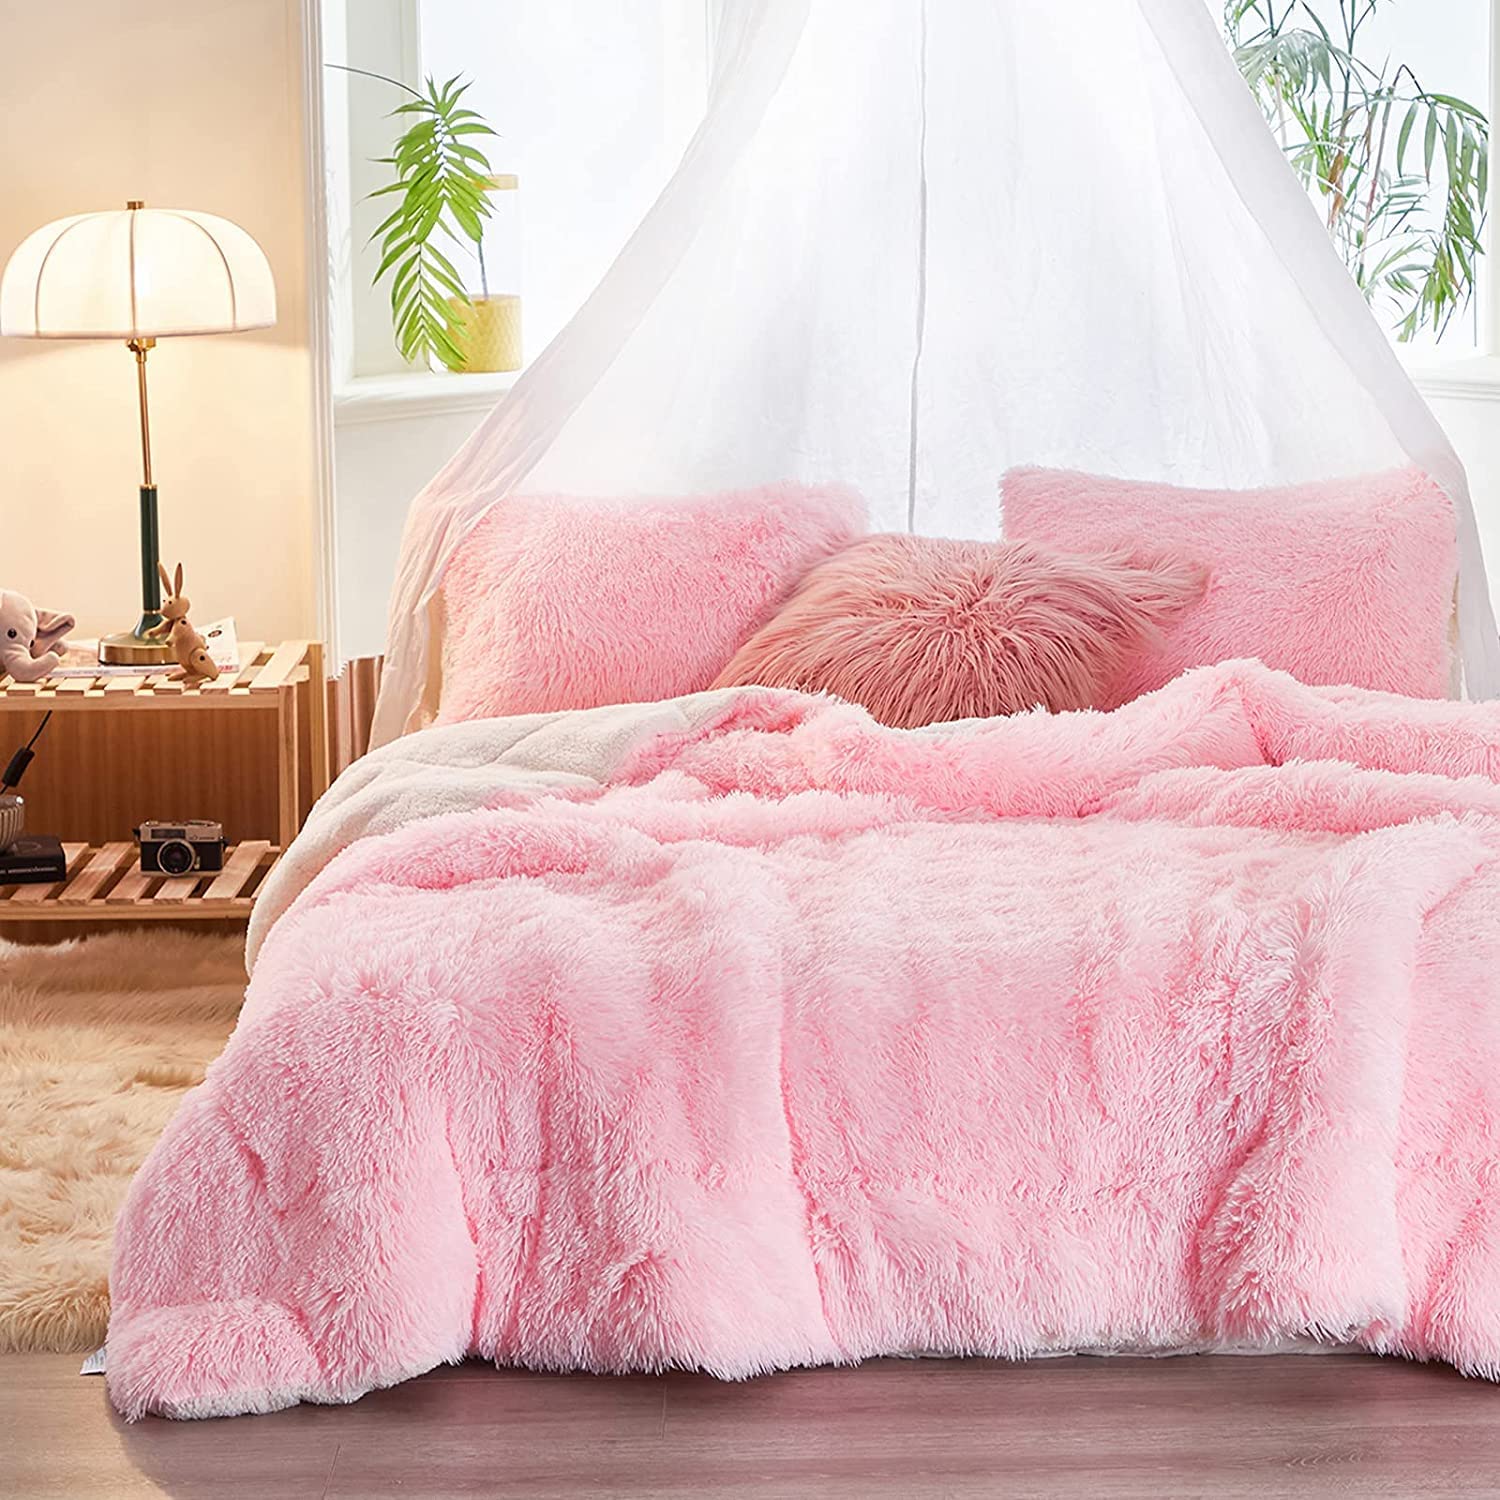 Cute Pink Shaggy Plush Comforter Cover Set,Ultra Soft Faux Fur Duvet Cover  Bedding Sets Queen 3 Pieces with Pillow Cases, Pink Fluffy Bed Sets Zipper  Closure (Pink, Queen) : : Home